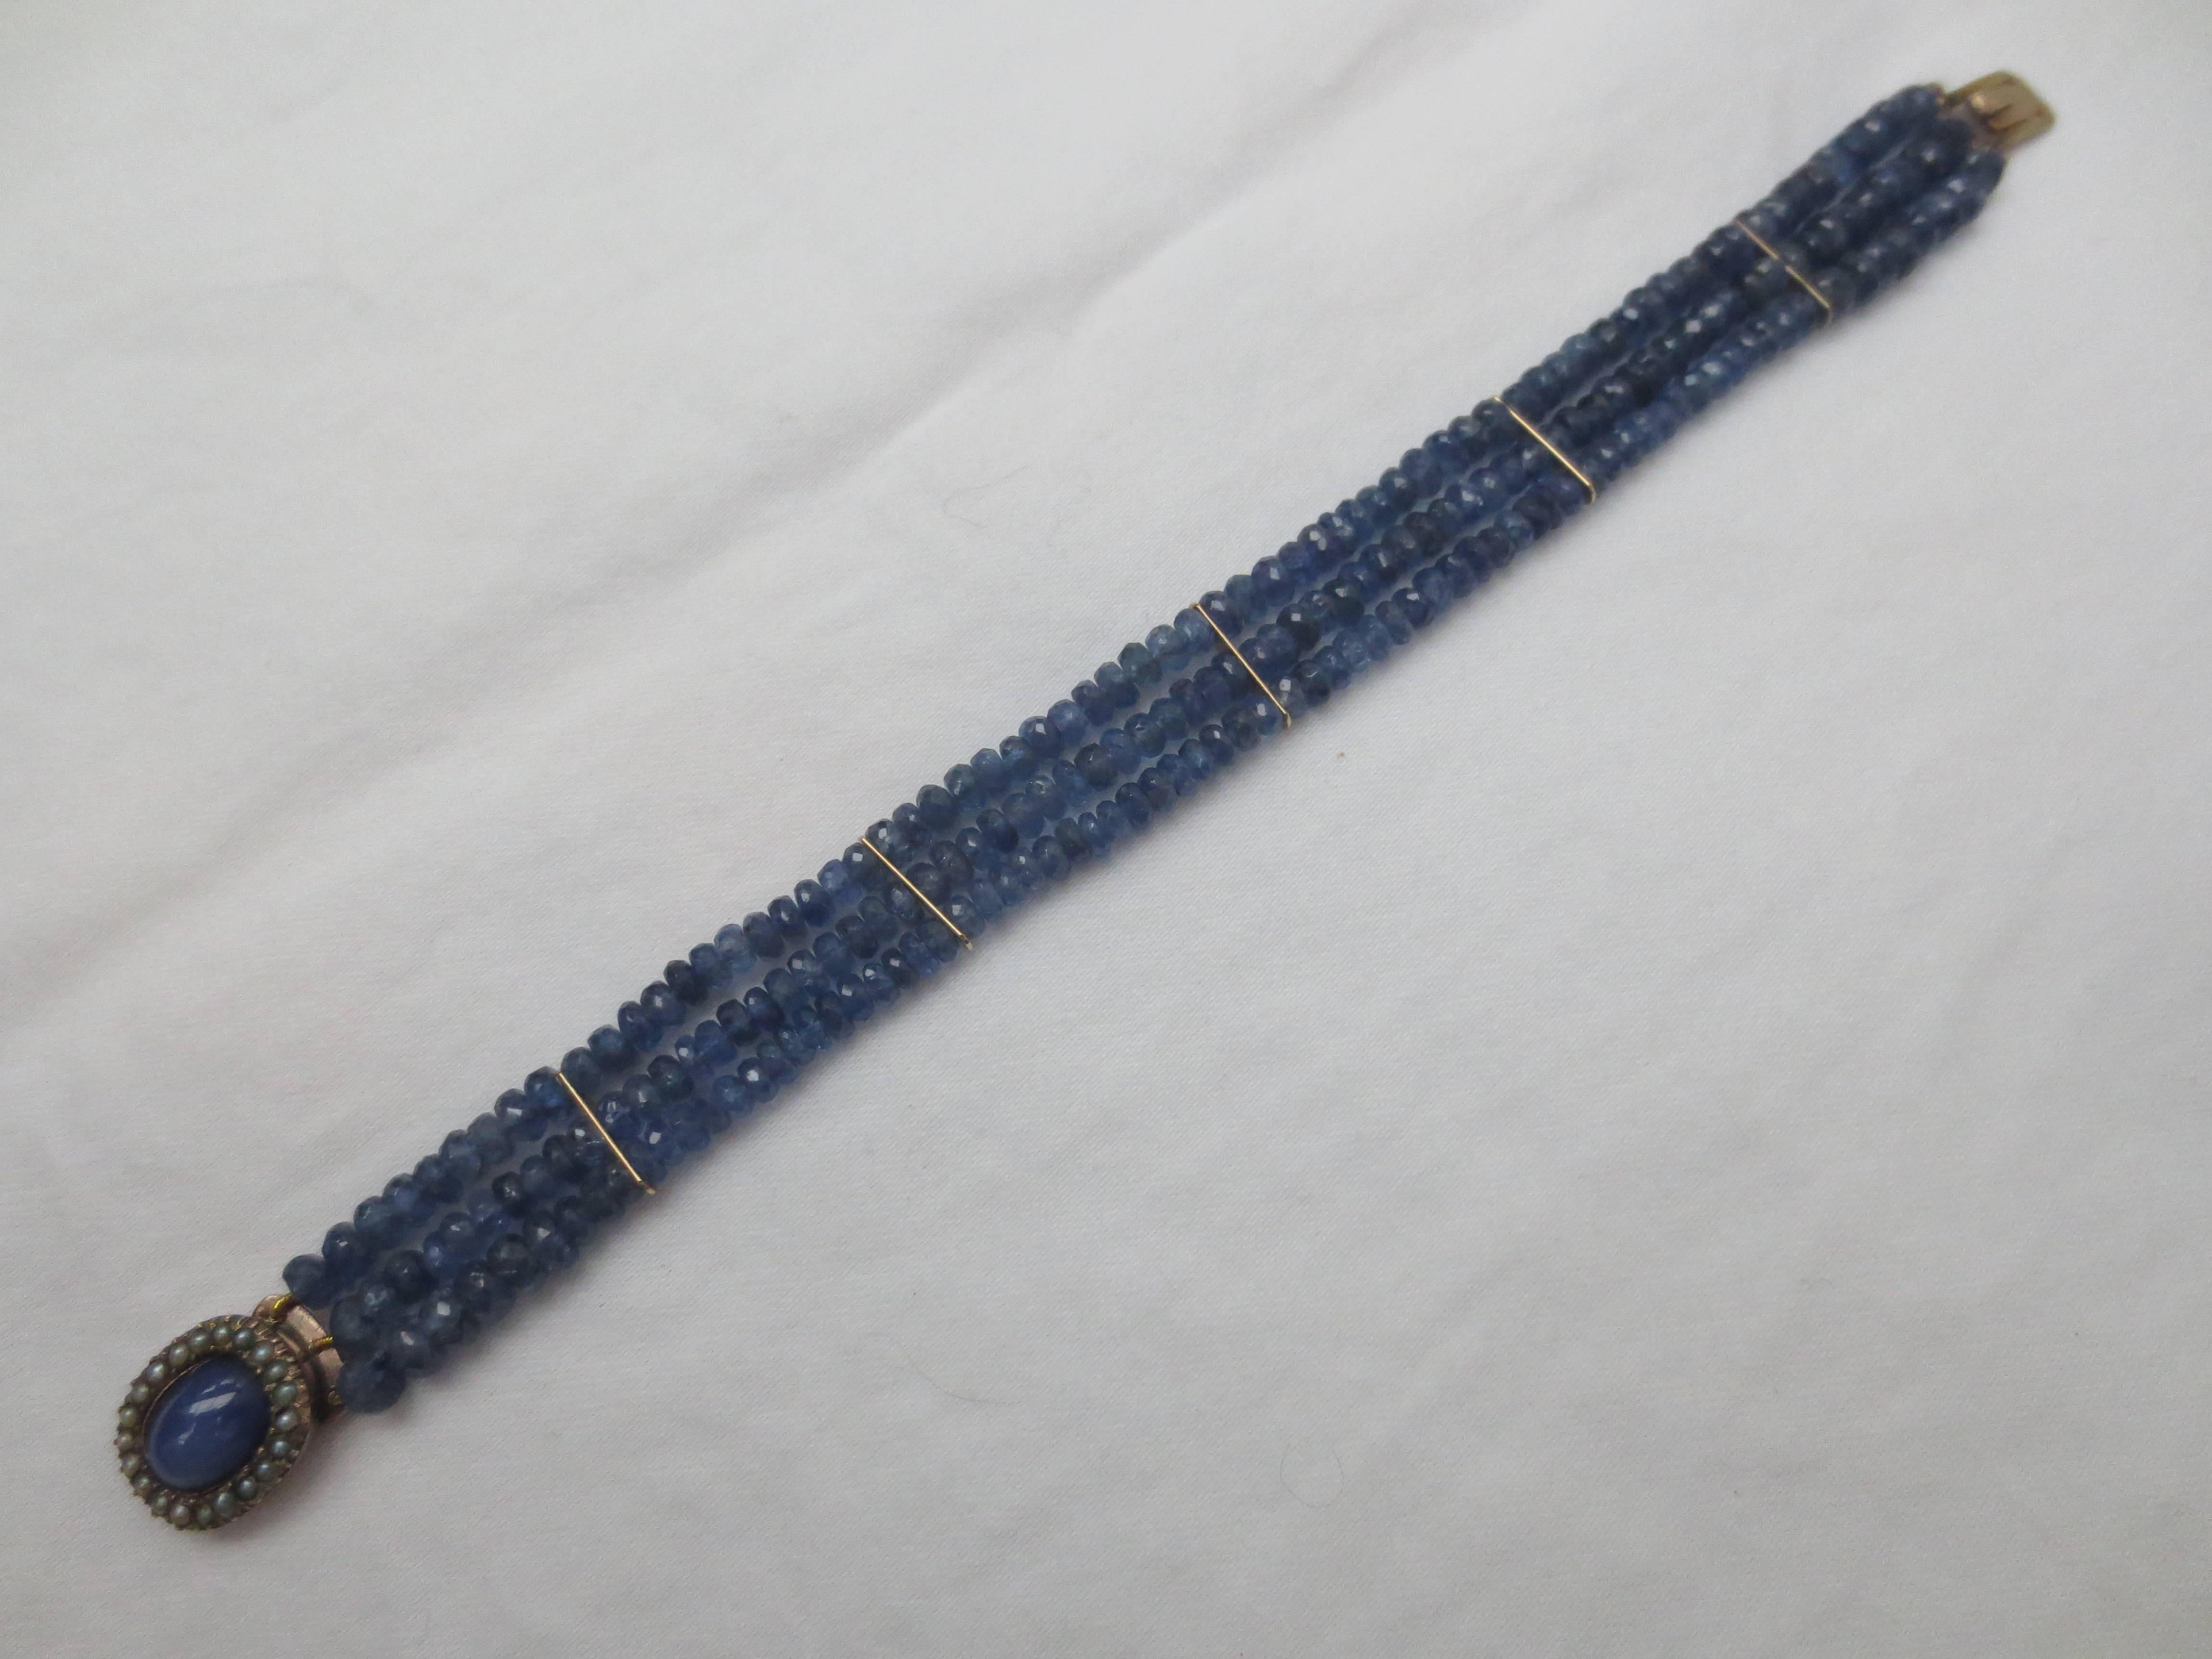 Turn-of-the-century gold and seed-pearl mourning clasp, refitted with 1cm star sapphire stone. The clasp serves and the centerpiece for strands of faceted blue sapphire beads divided by 14 k gold segments. 

Made by Marina J. 2016